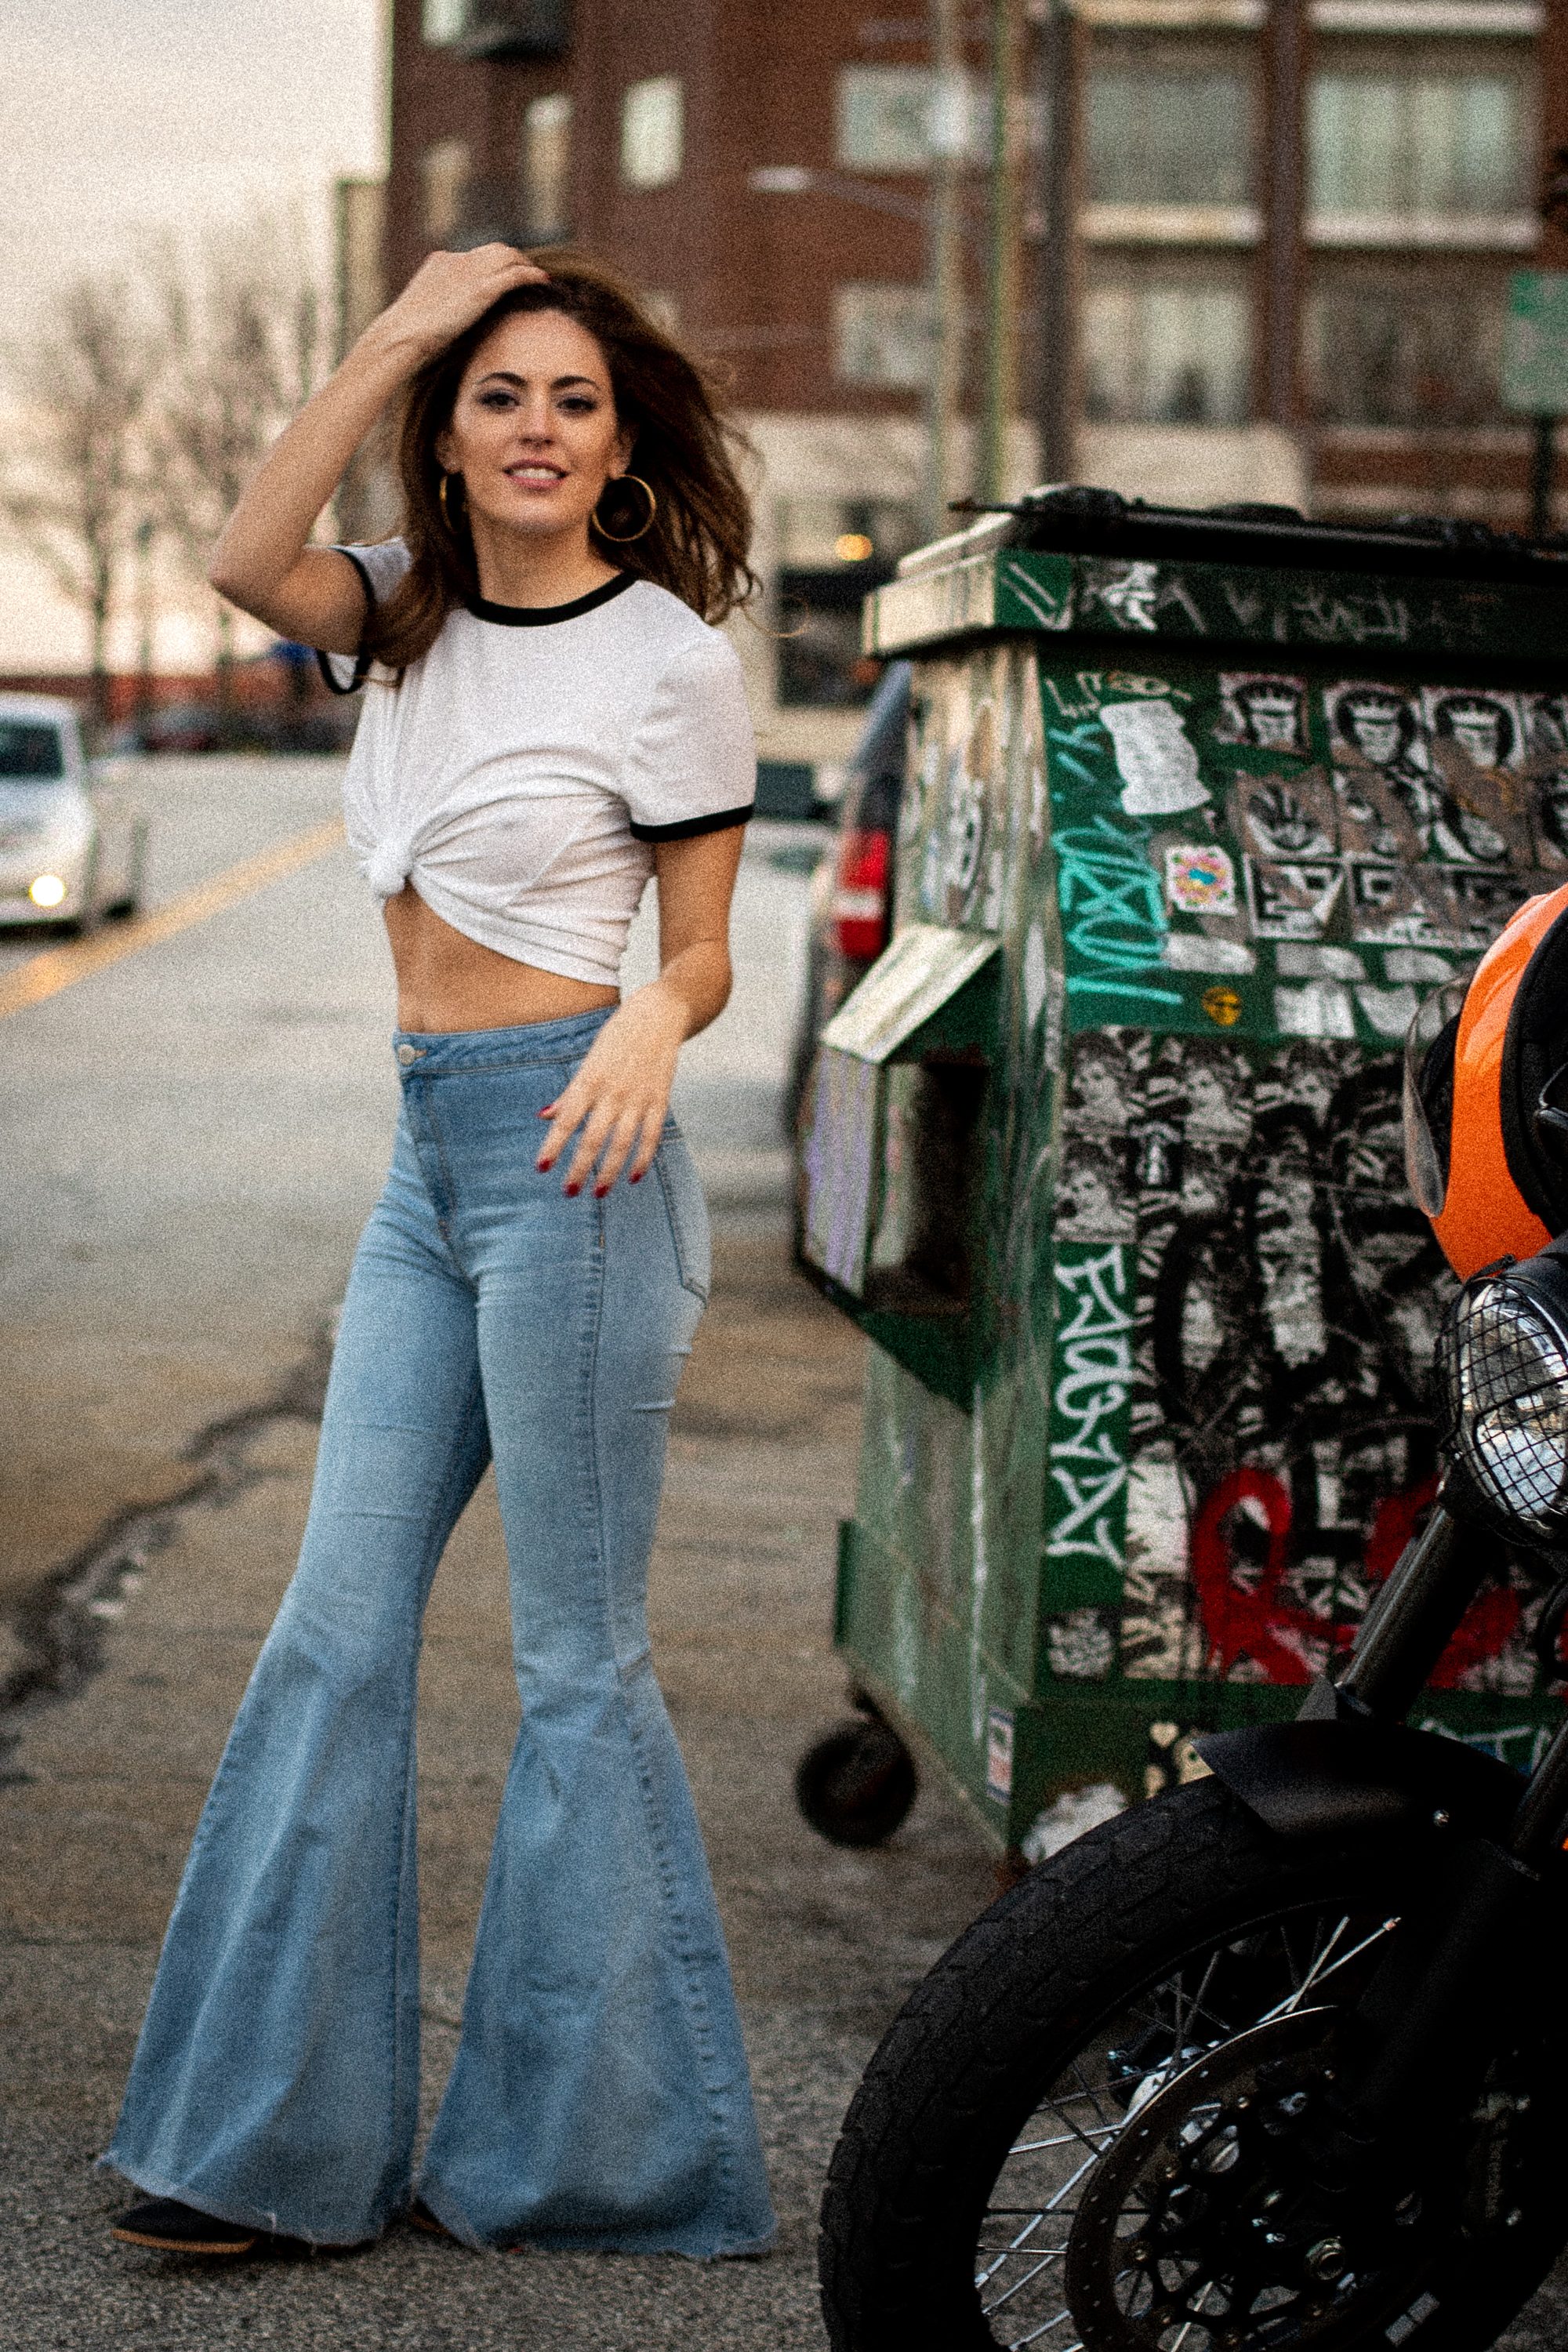 70s style, casual 70s outfit ideas, how to wear bell bottoms, how to wear a ringer tee, elliott street pub, casual style